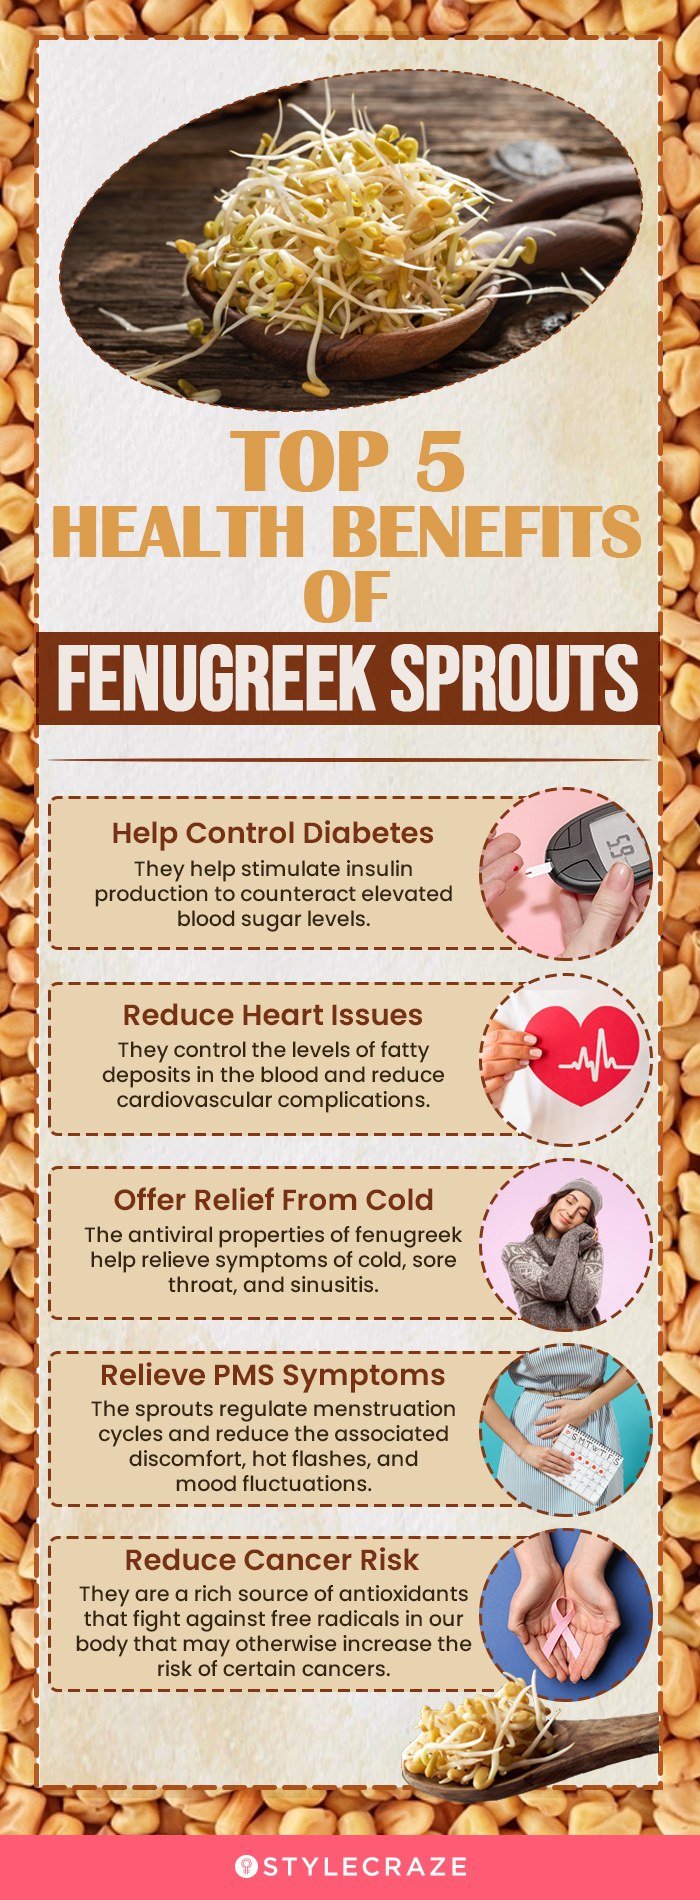 top 5 health benefits of fenugreek sprouts(infographic)